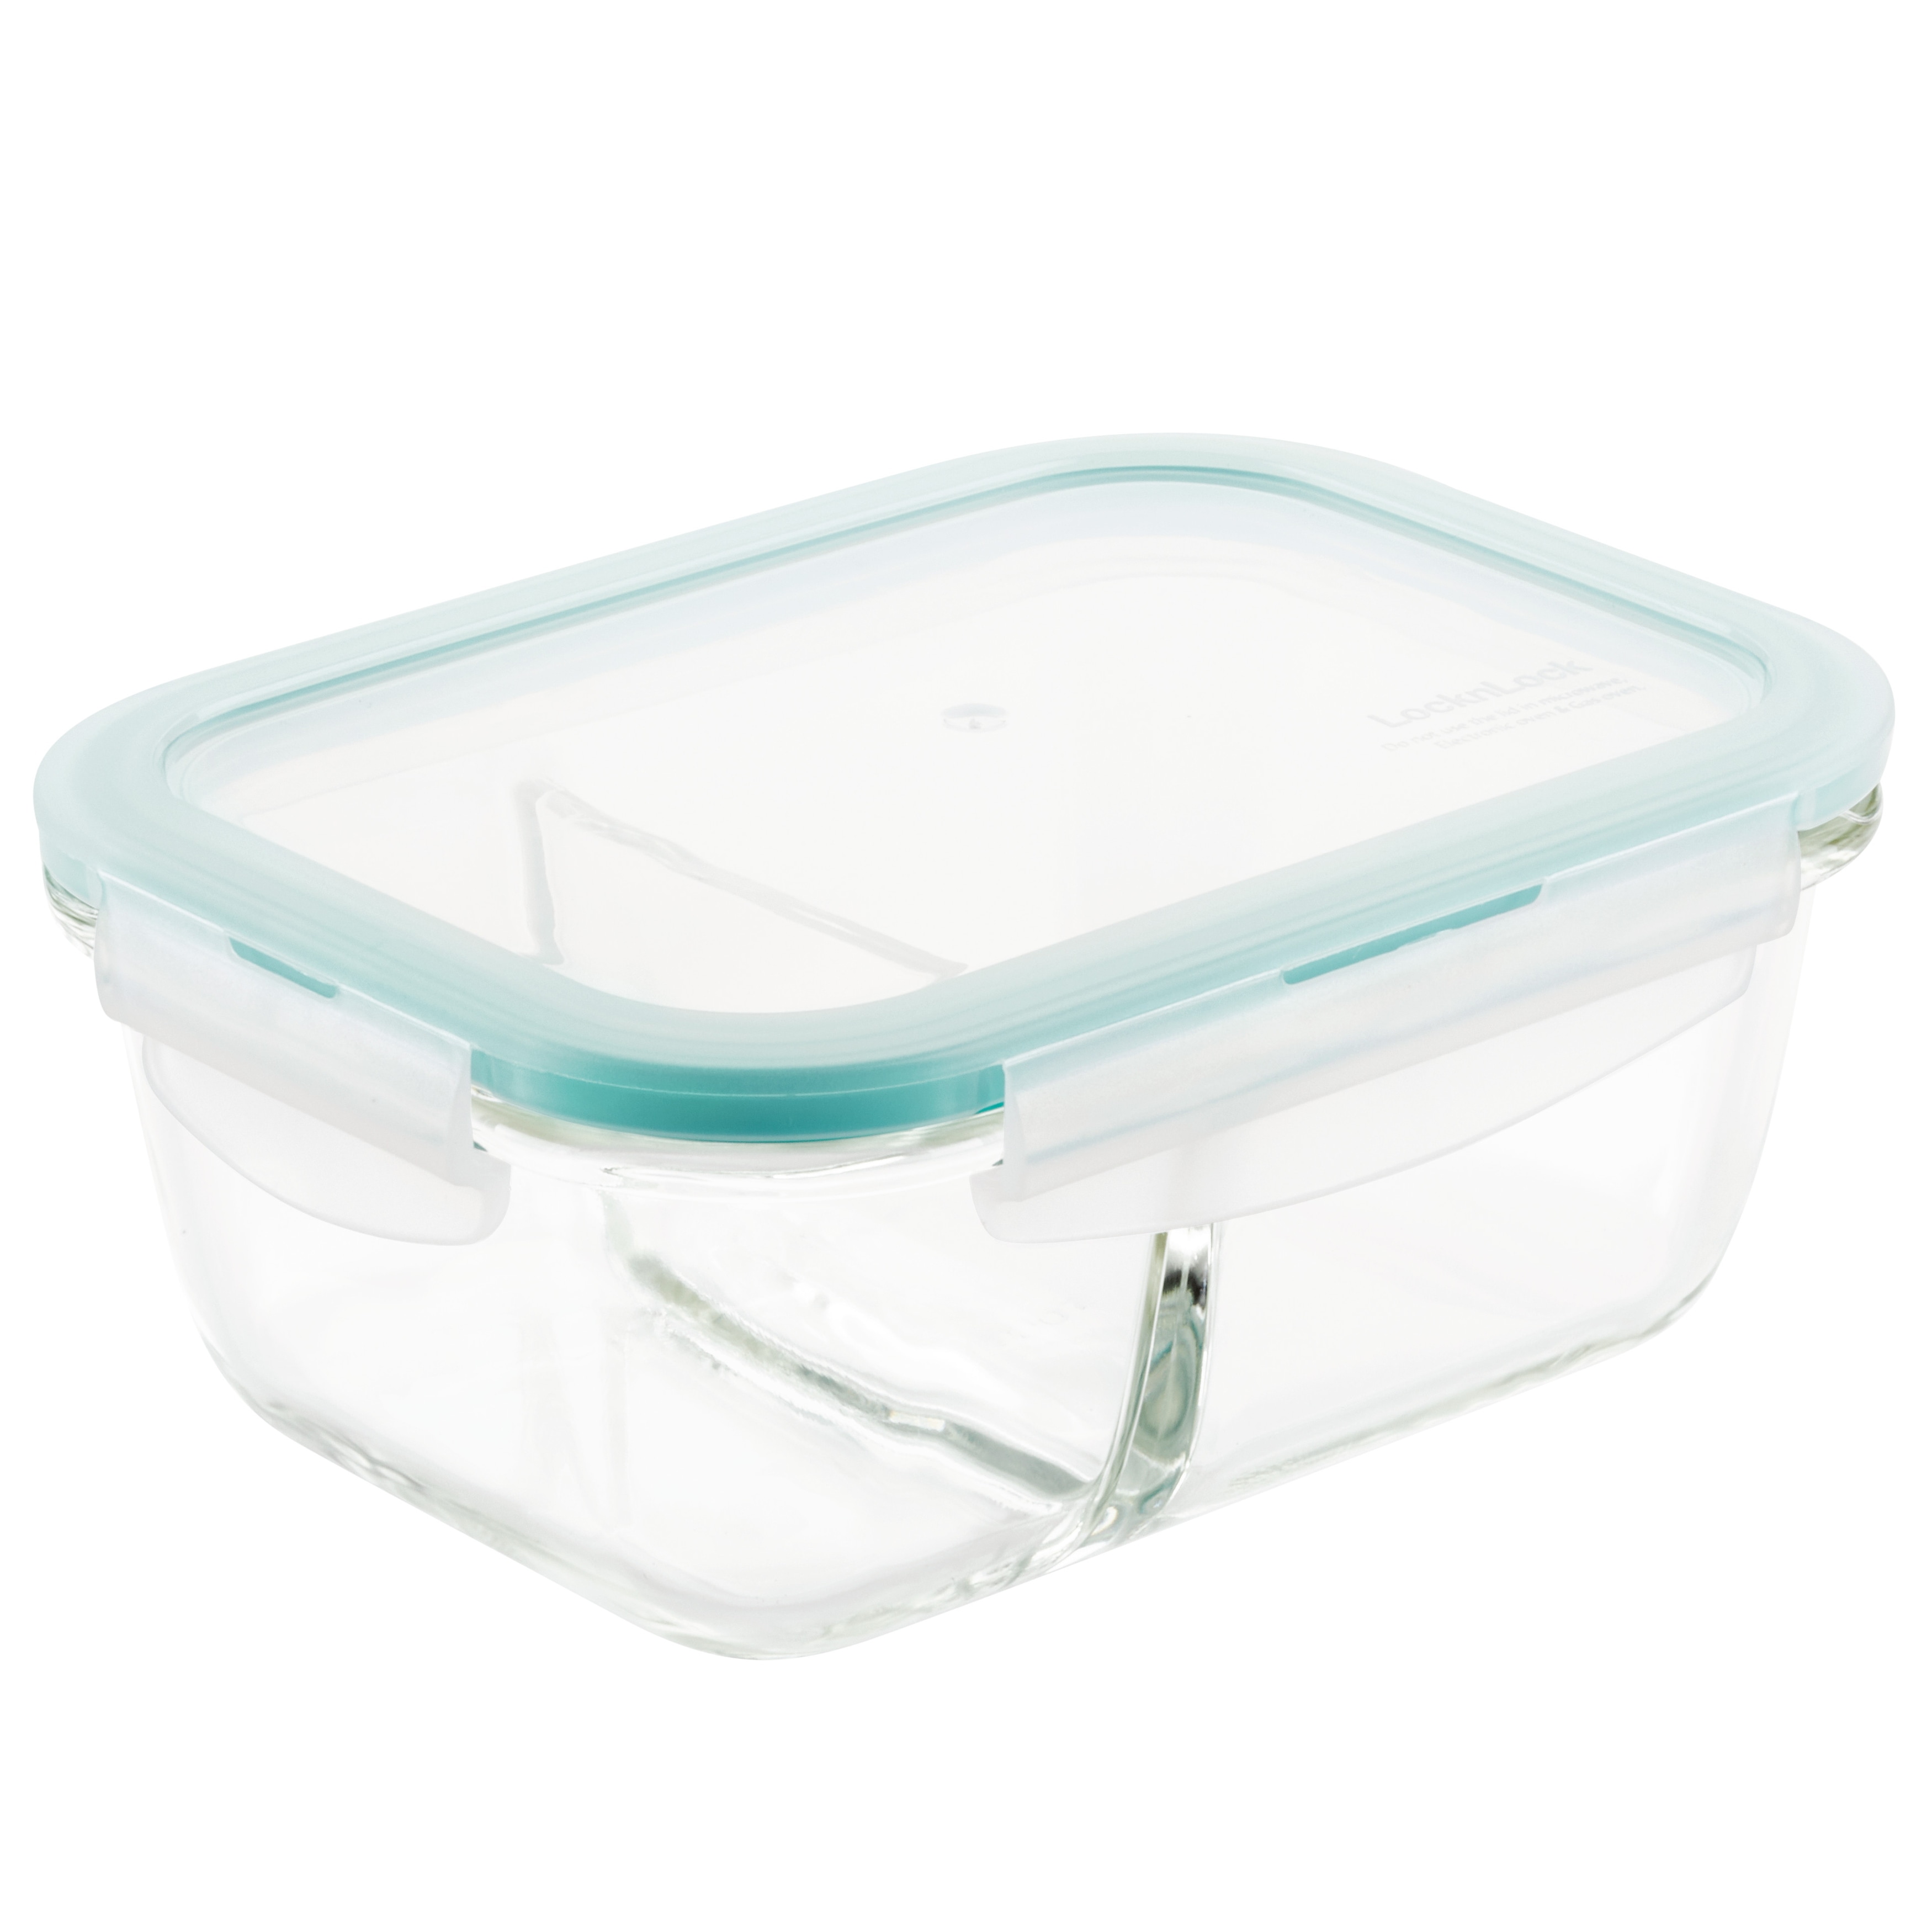 https://ak1.ostkcdn.com/images/products/is/images/direct/90a0f3e50d46fc5dfd5a9669fcc60219aa3fbe93/LocknLock-Purely-Better-Glass-Divided-Rectangular-Food-Storage-Containers%2C-25-Ounce%2C-Set-of-Three.jpg